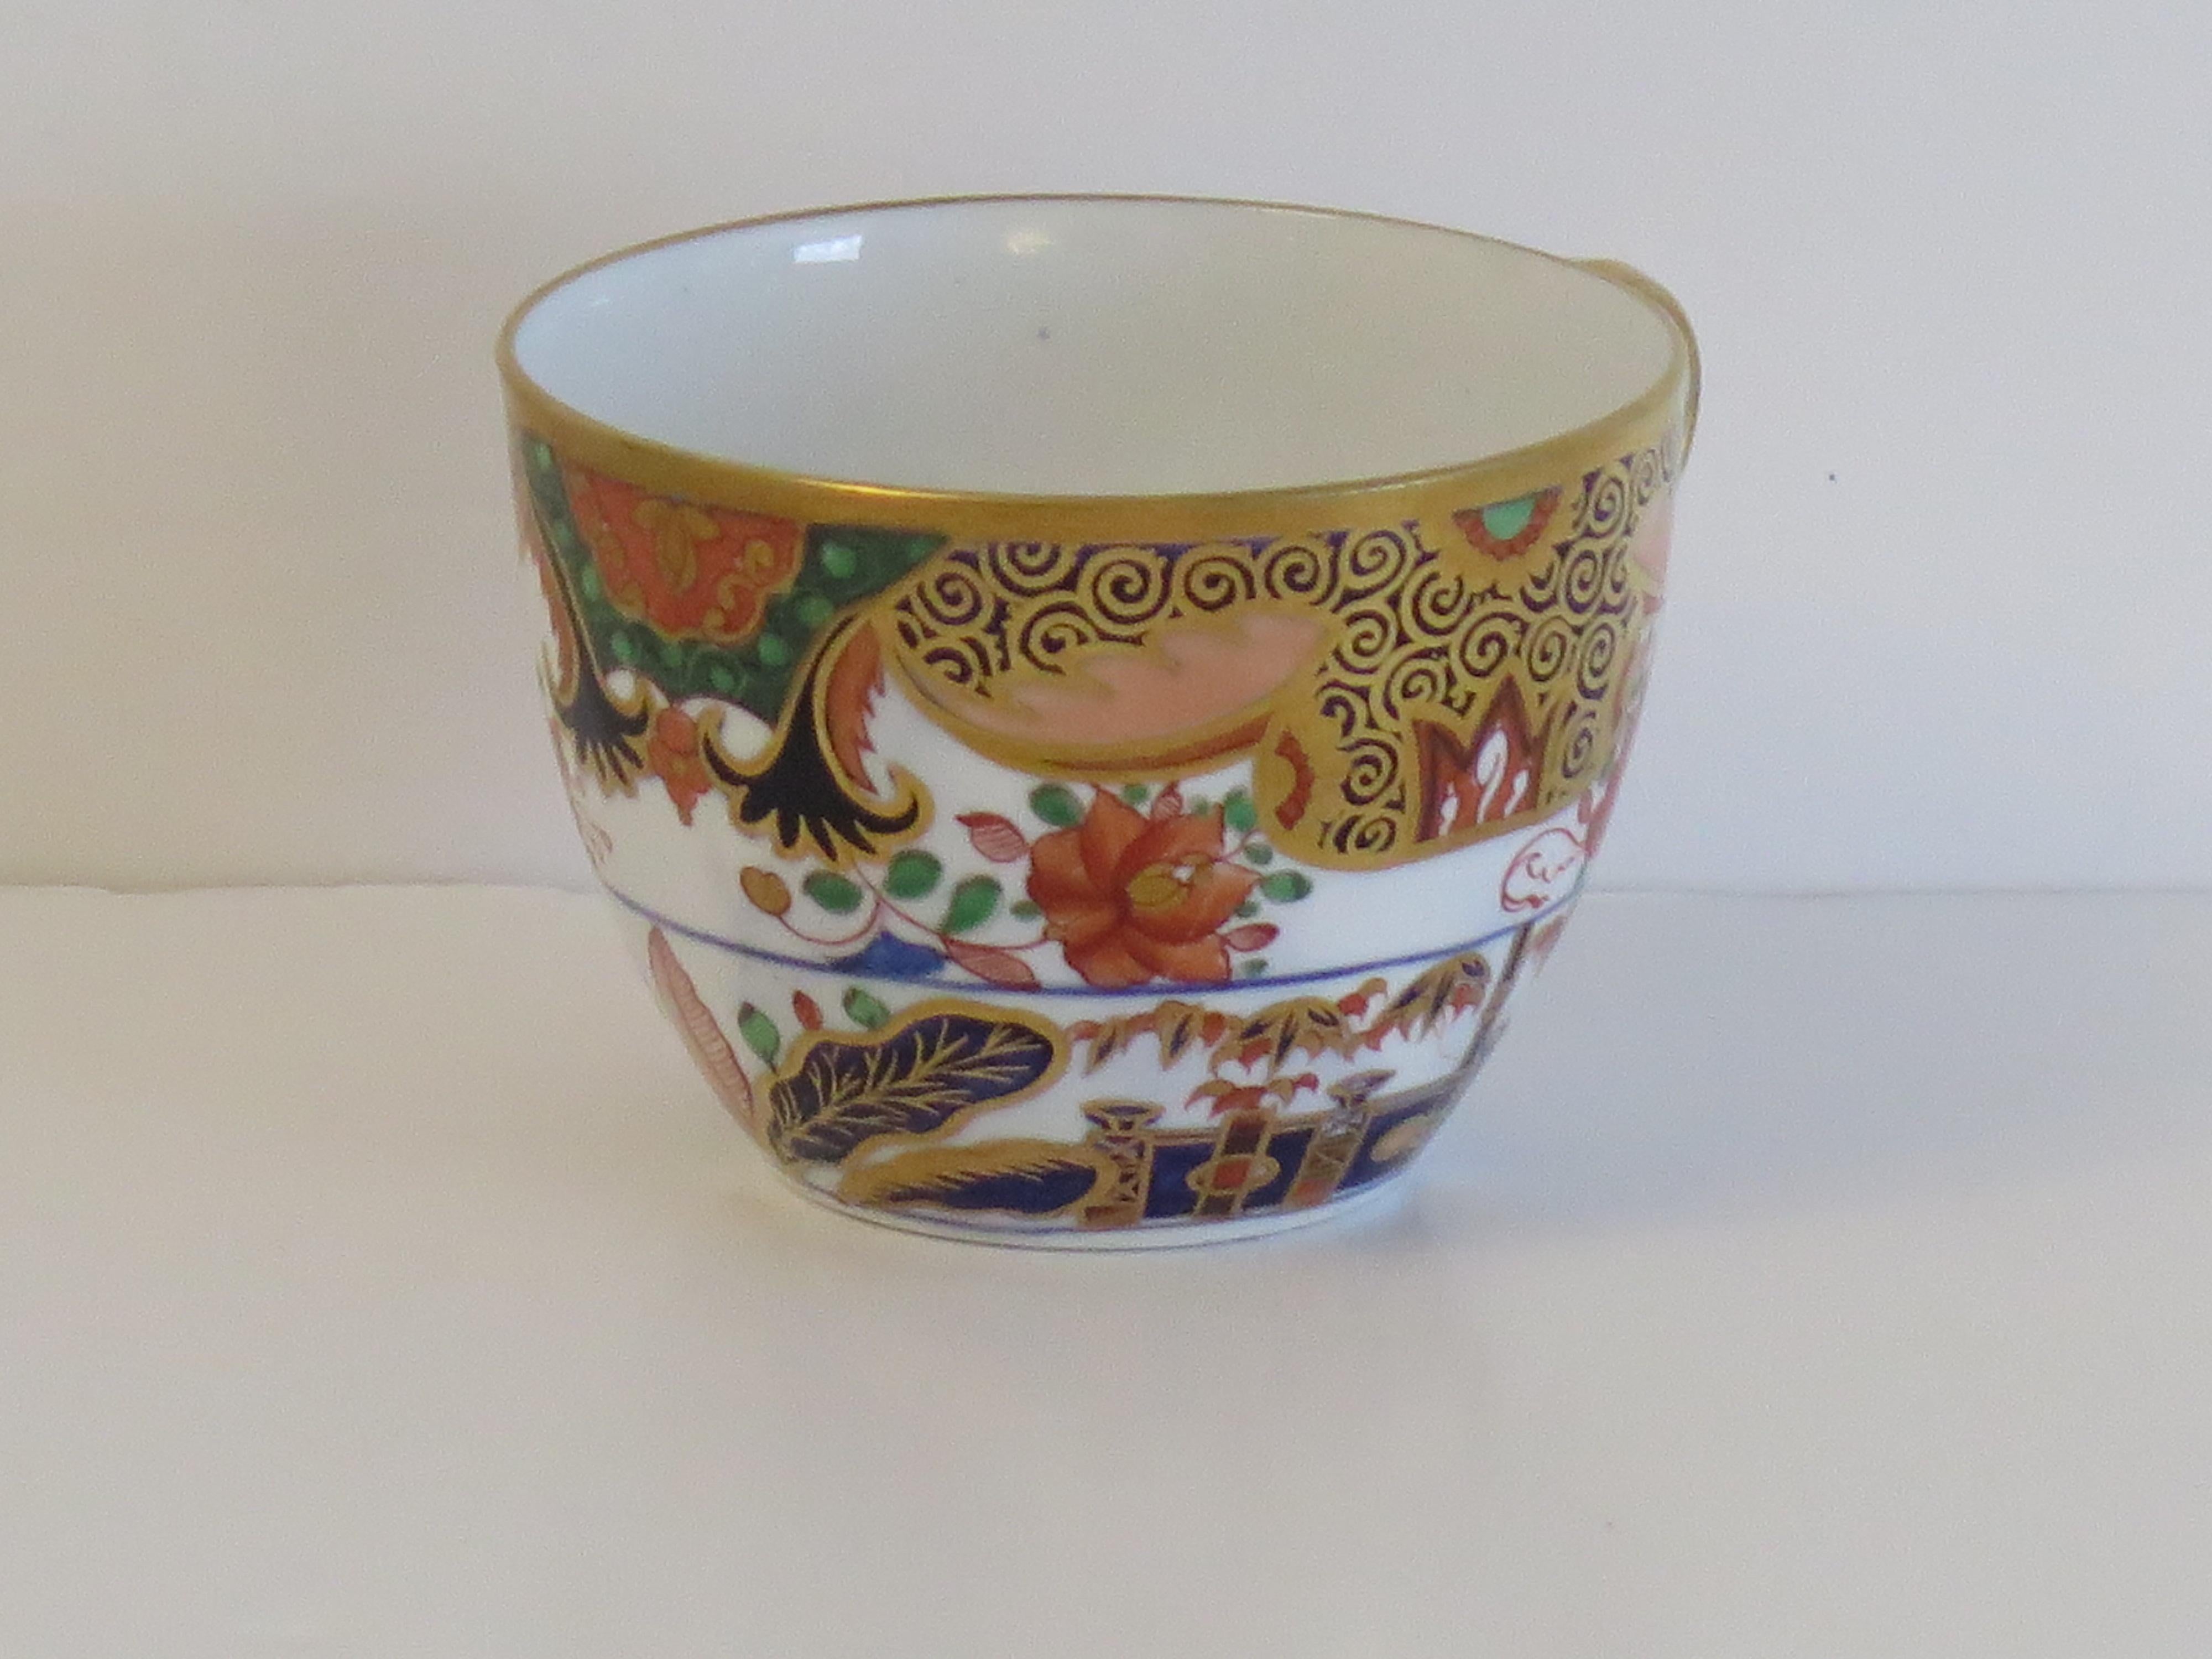 Spode Porcelain Tea Cup in Hand Painted & Gilded Pattern 967, circa 1810 For Sale 3